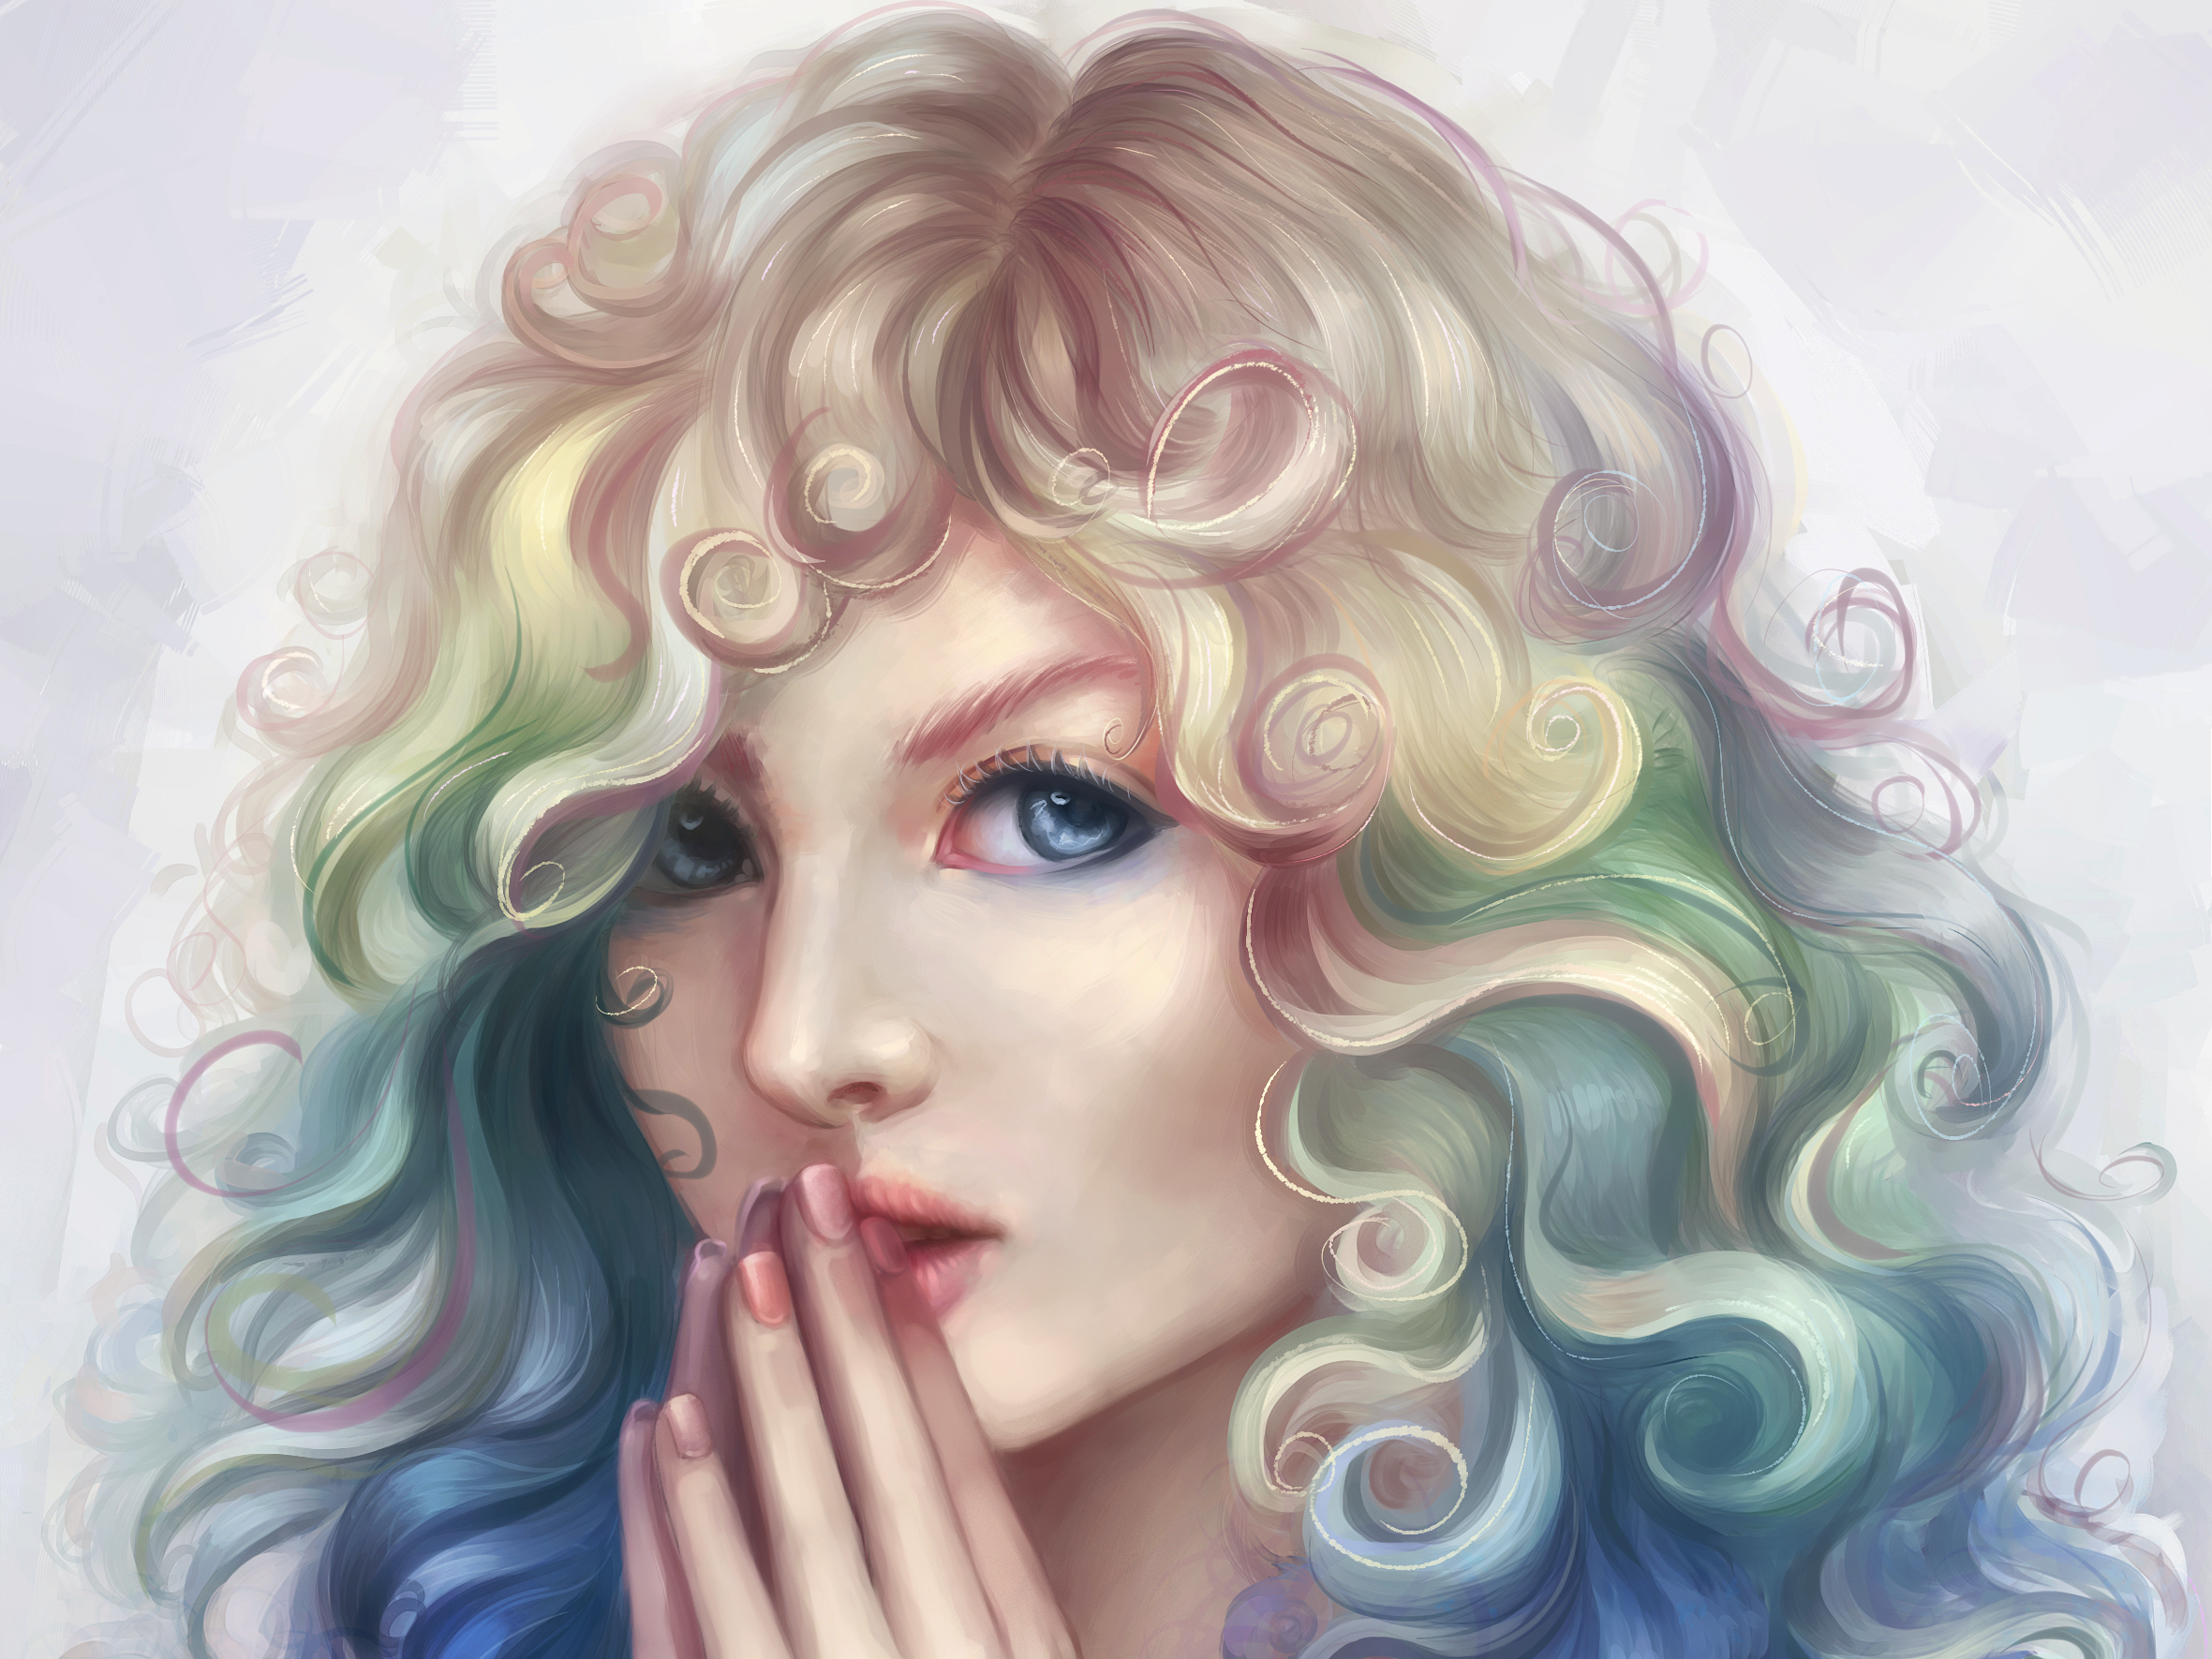 Painting of Curly-Haired Girl by Marfyta